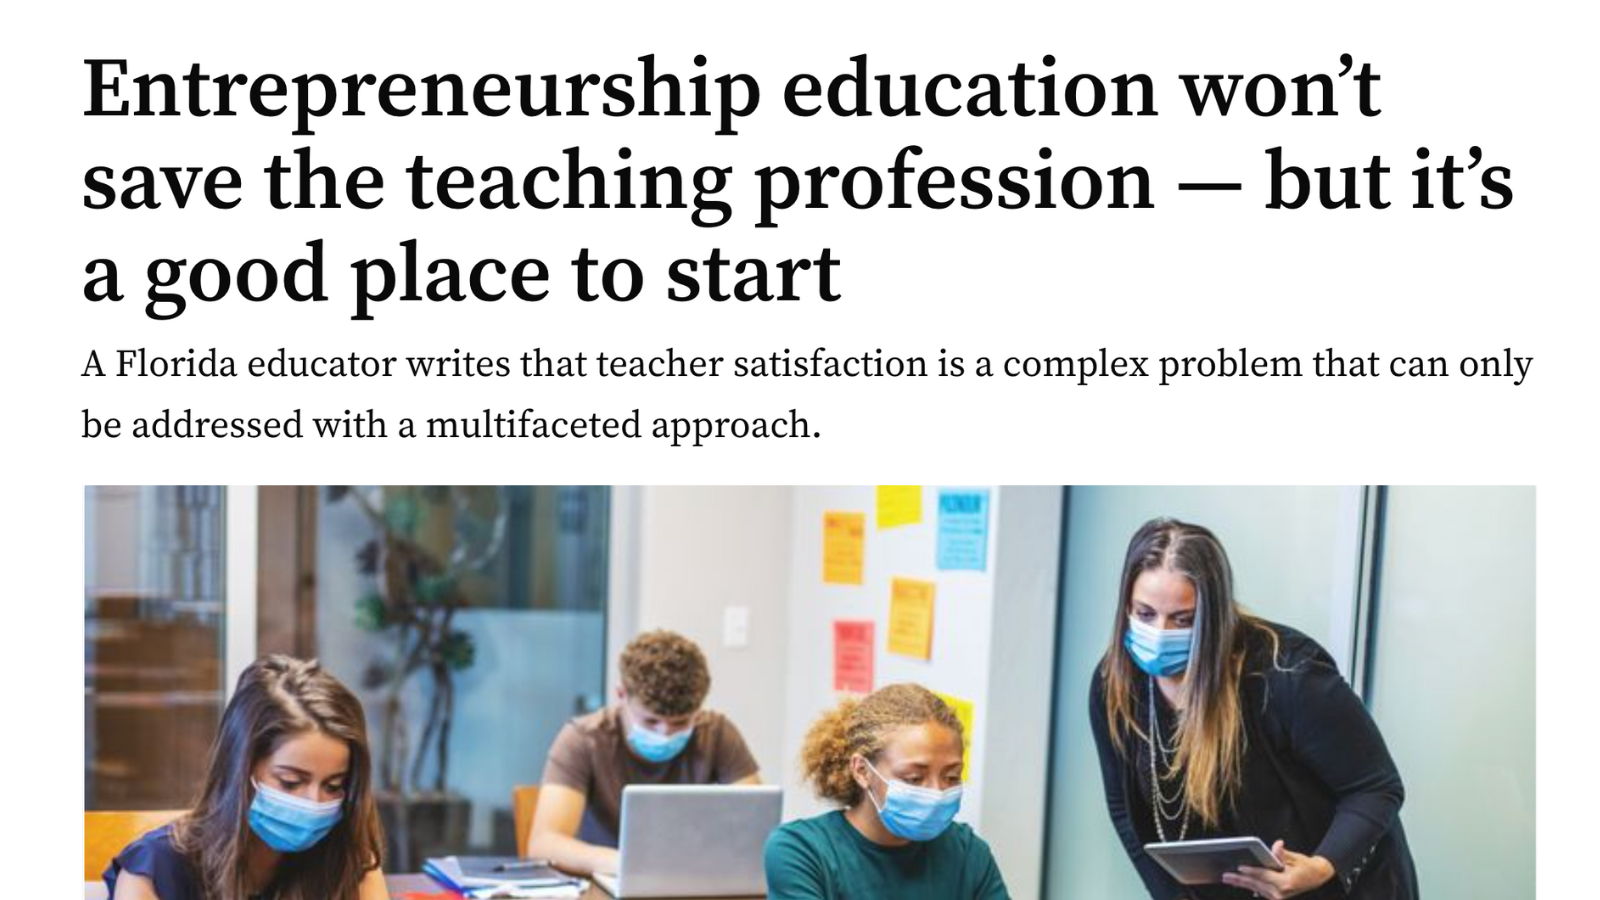 Entrepreneurship education won’t save the teaching profession — but it’s a good place to start